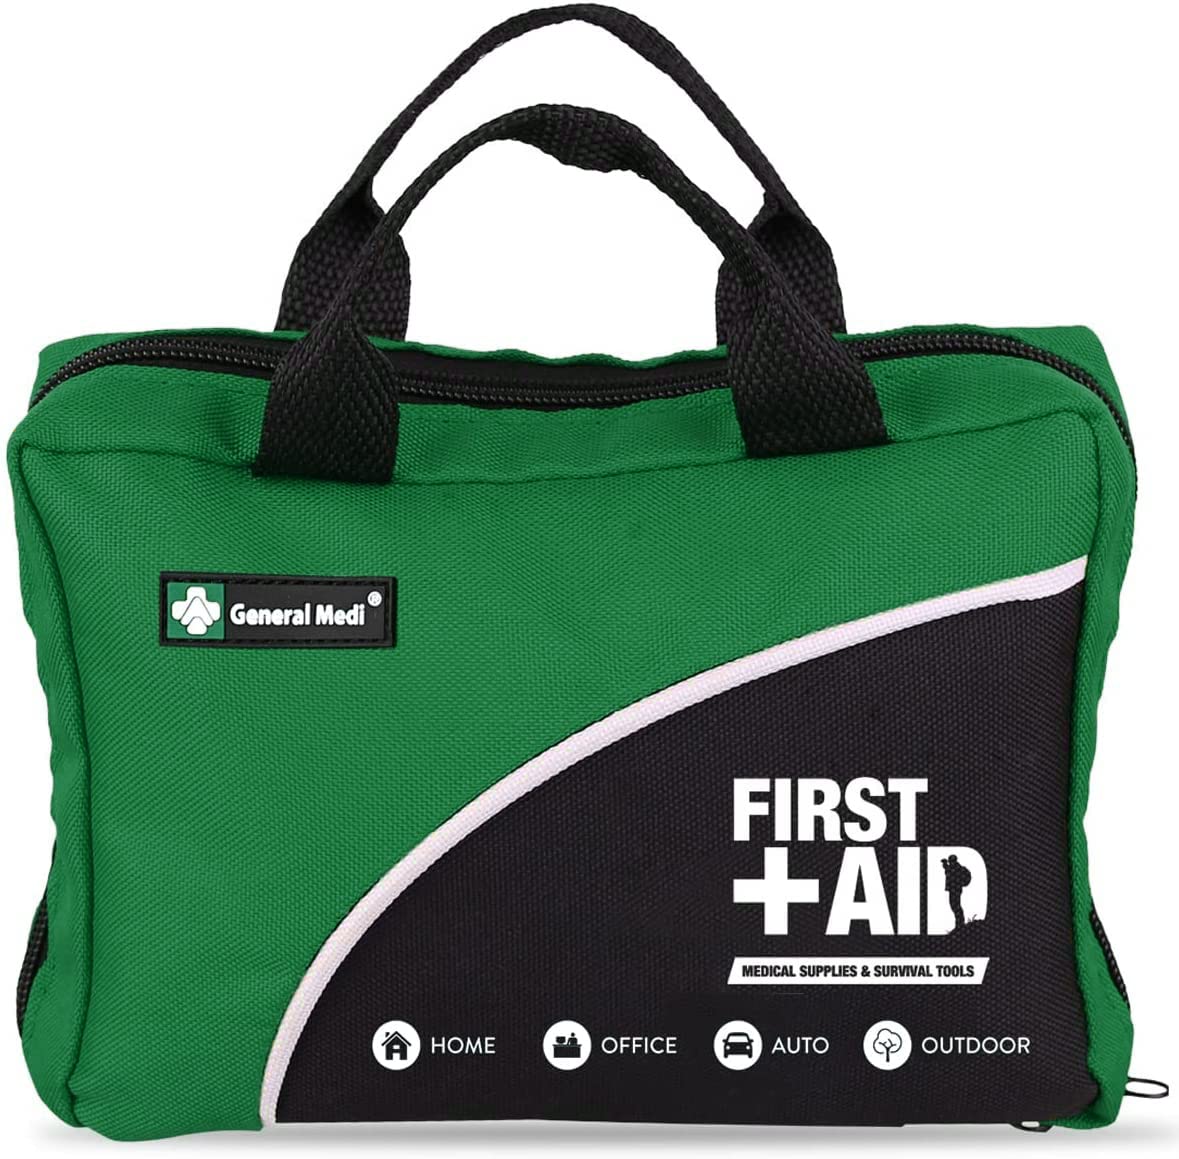 160 Piece Compact First Aid Kit Bag - Including Cold (Ice) Pack, Emergency Blanket, Moleskin Pad,Perfect for Travel, Home, Office, Car, Camping, Workplace (Green)